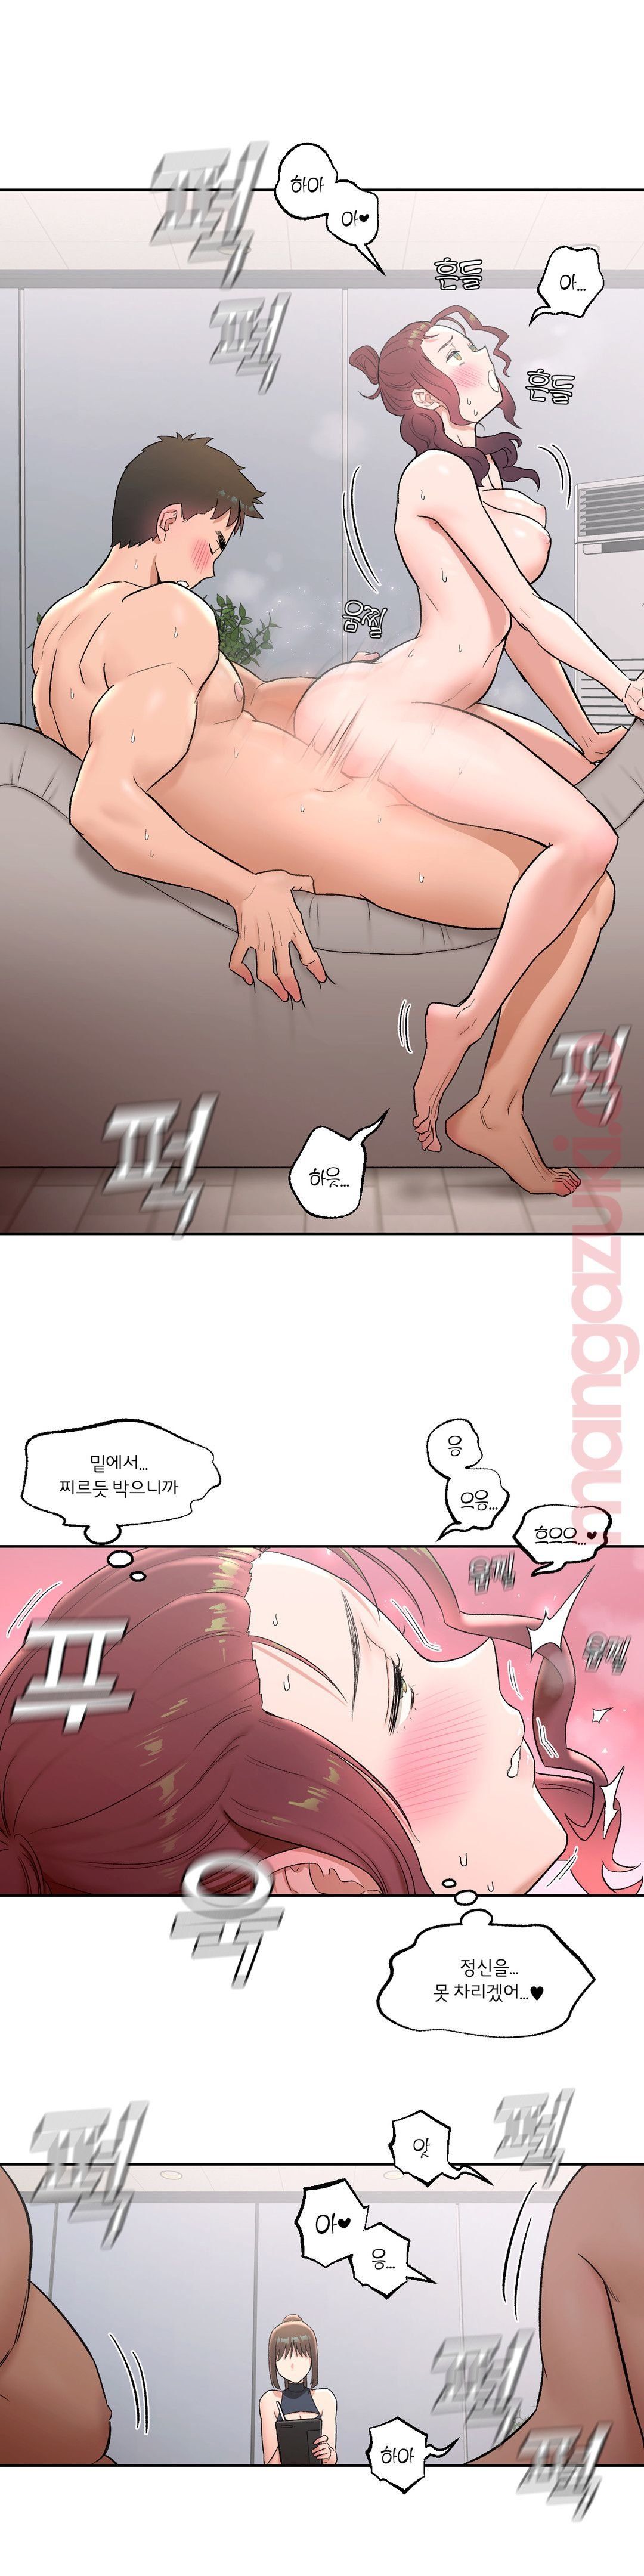 Sexercise Raw - Chapter 44 Page 4